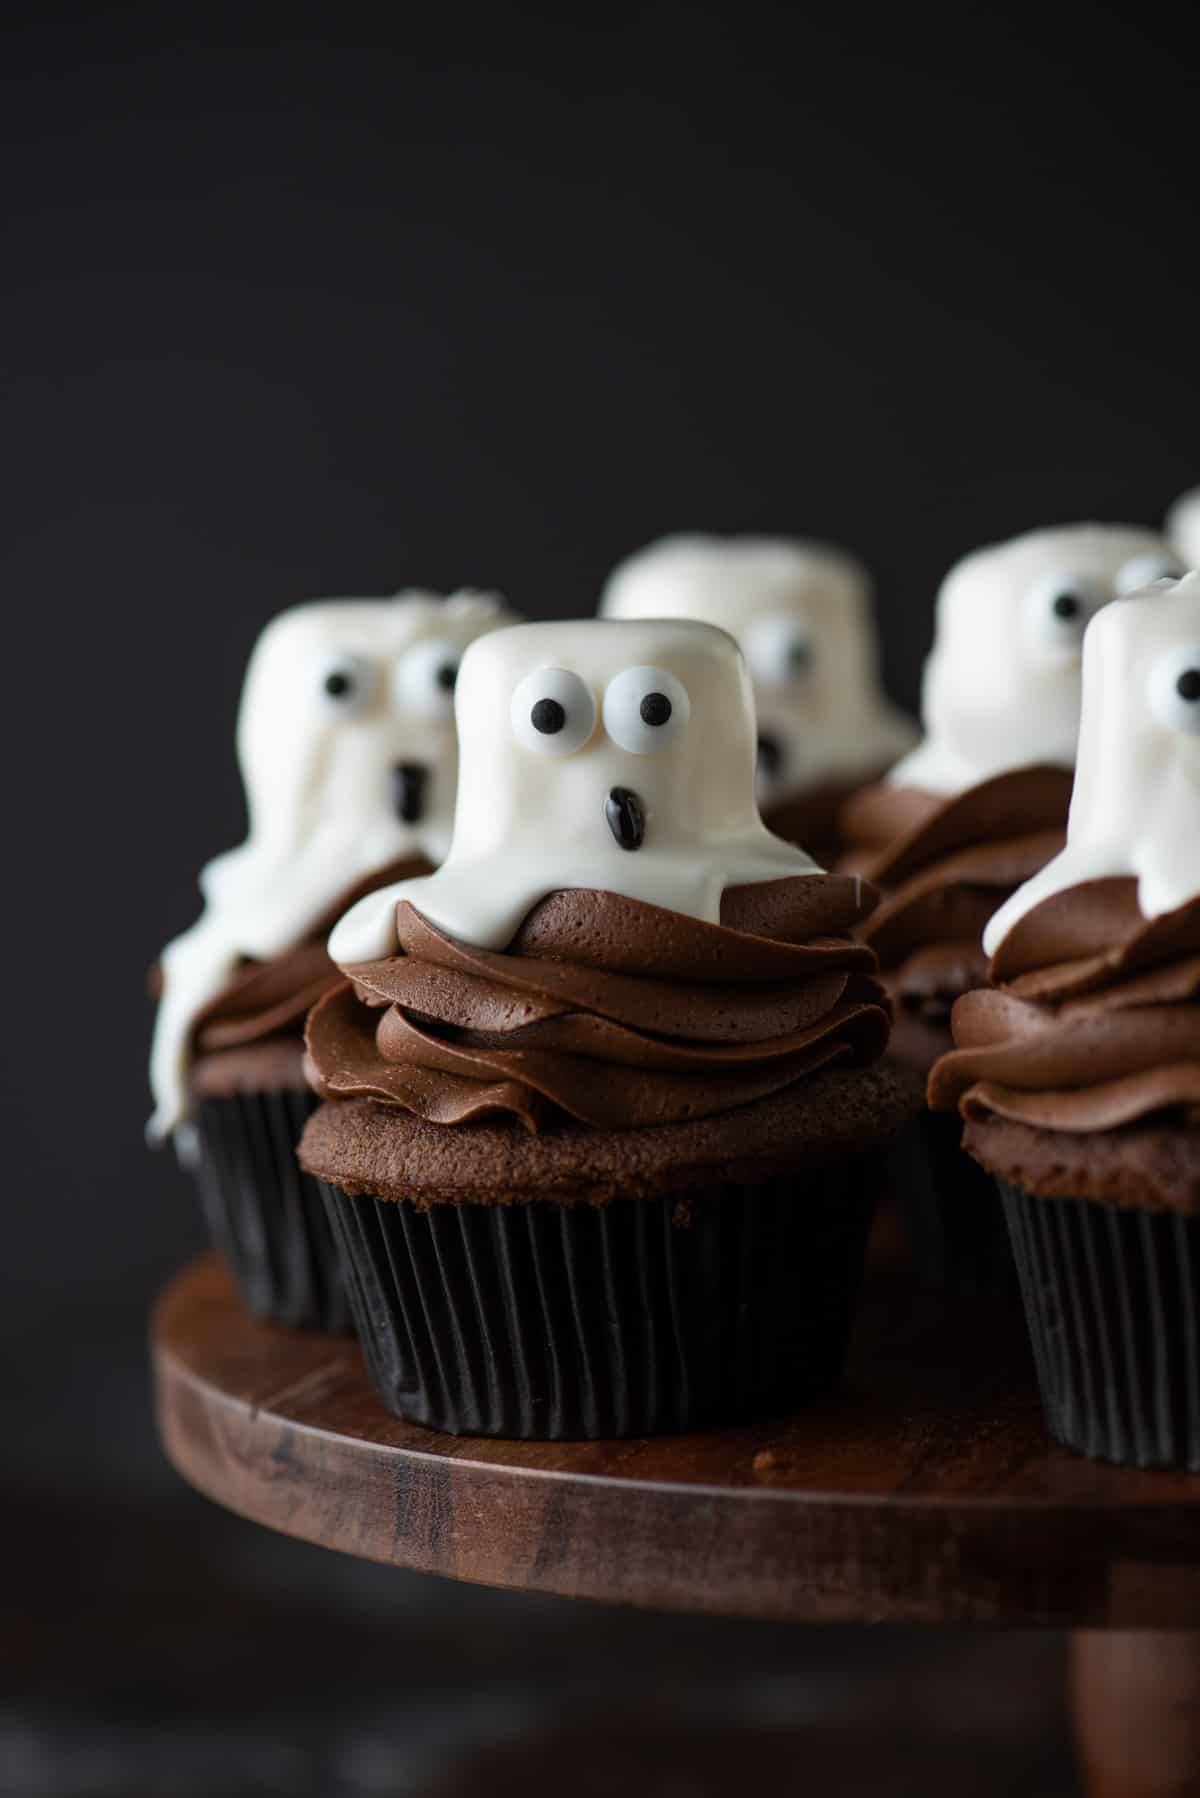 ghost cupcakes arranged on wooden cake stand on dark background